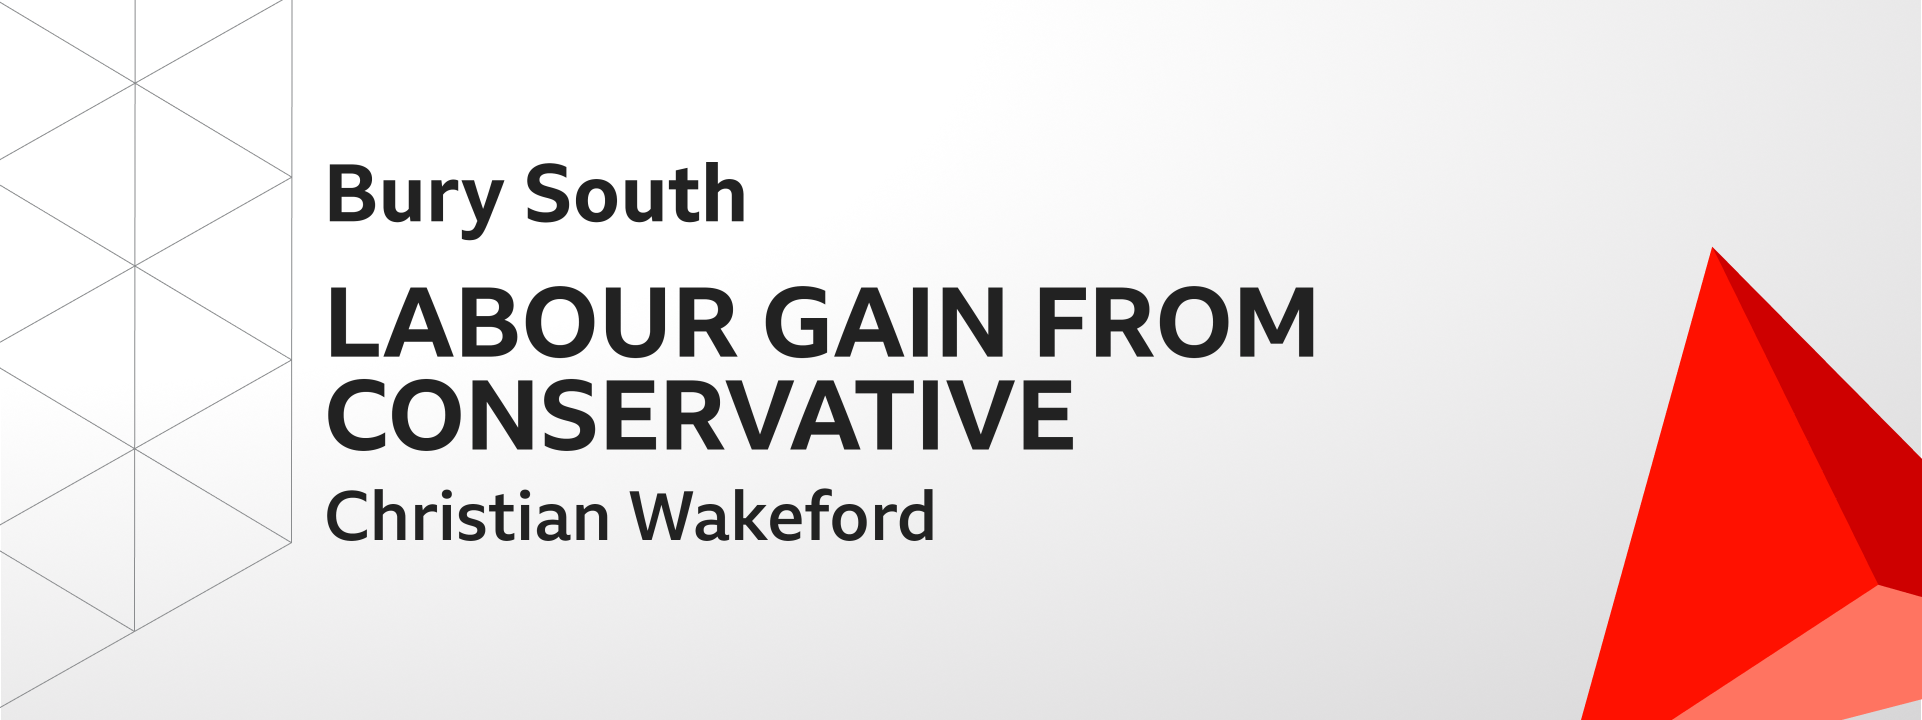 Graphic showing Labour gains Bury South from the Conservatives. The winning candidate was Christian Wakeford.